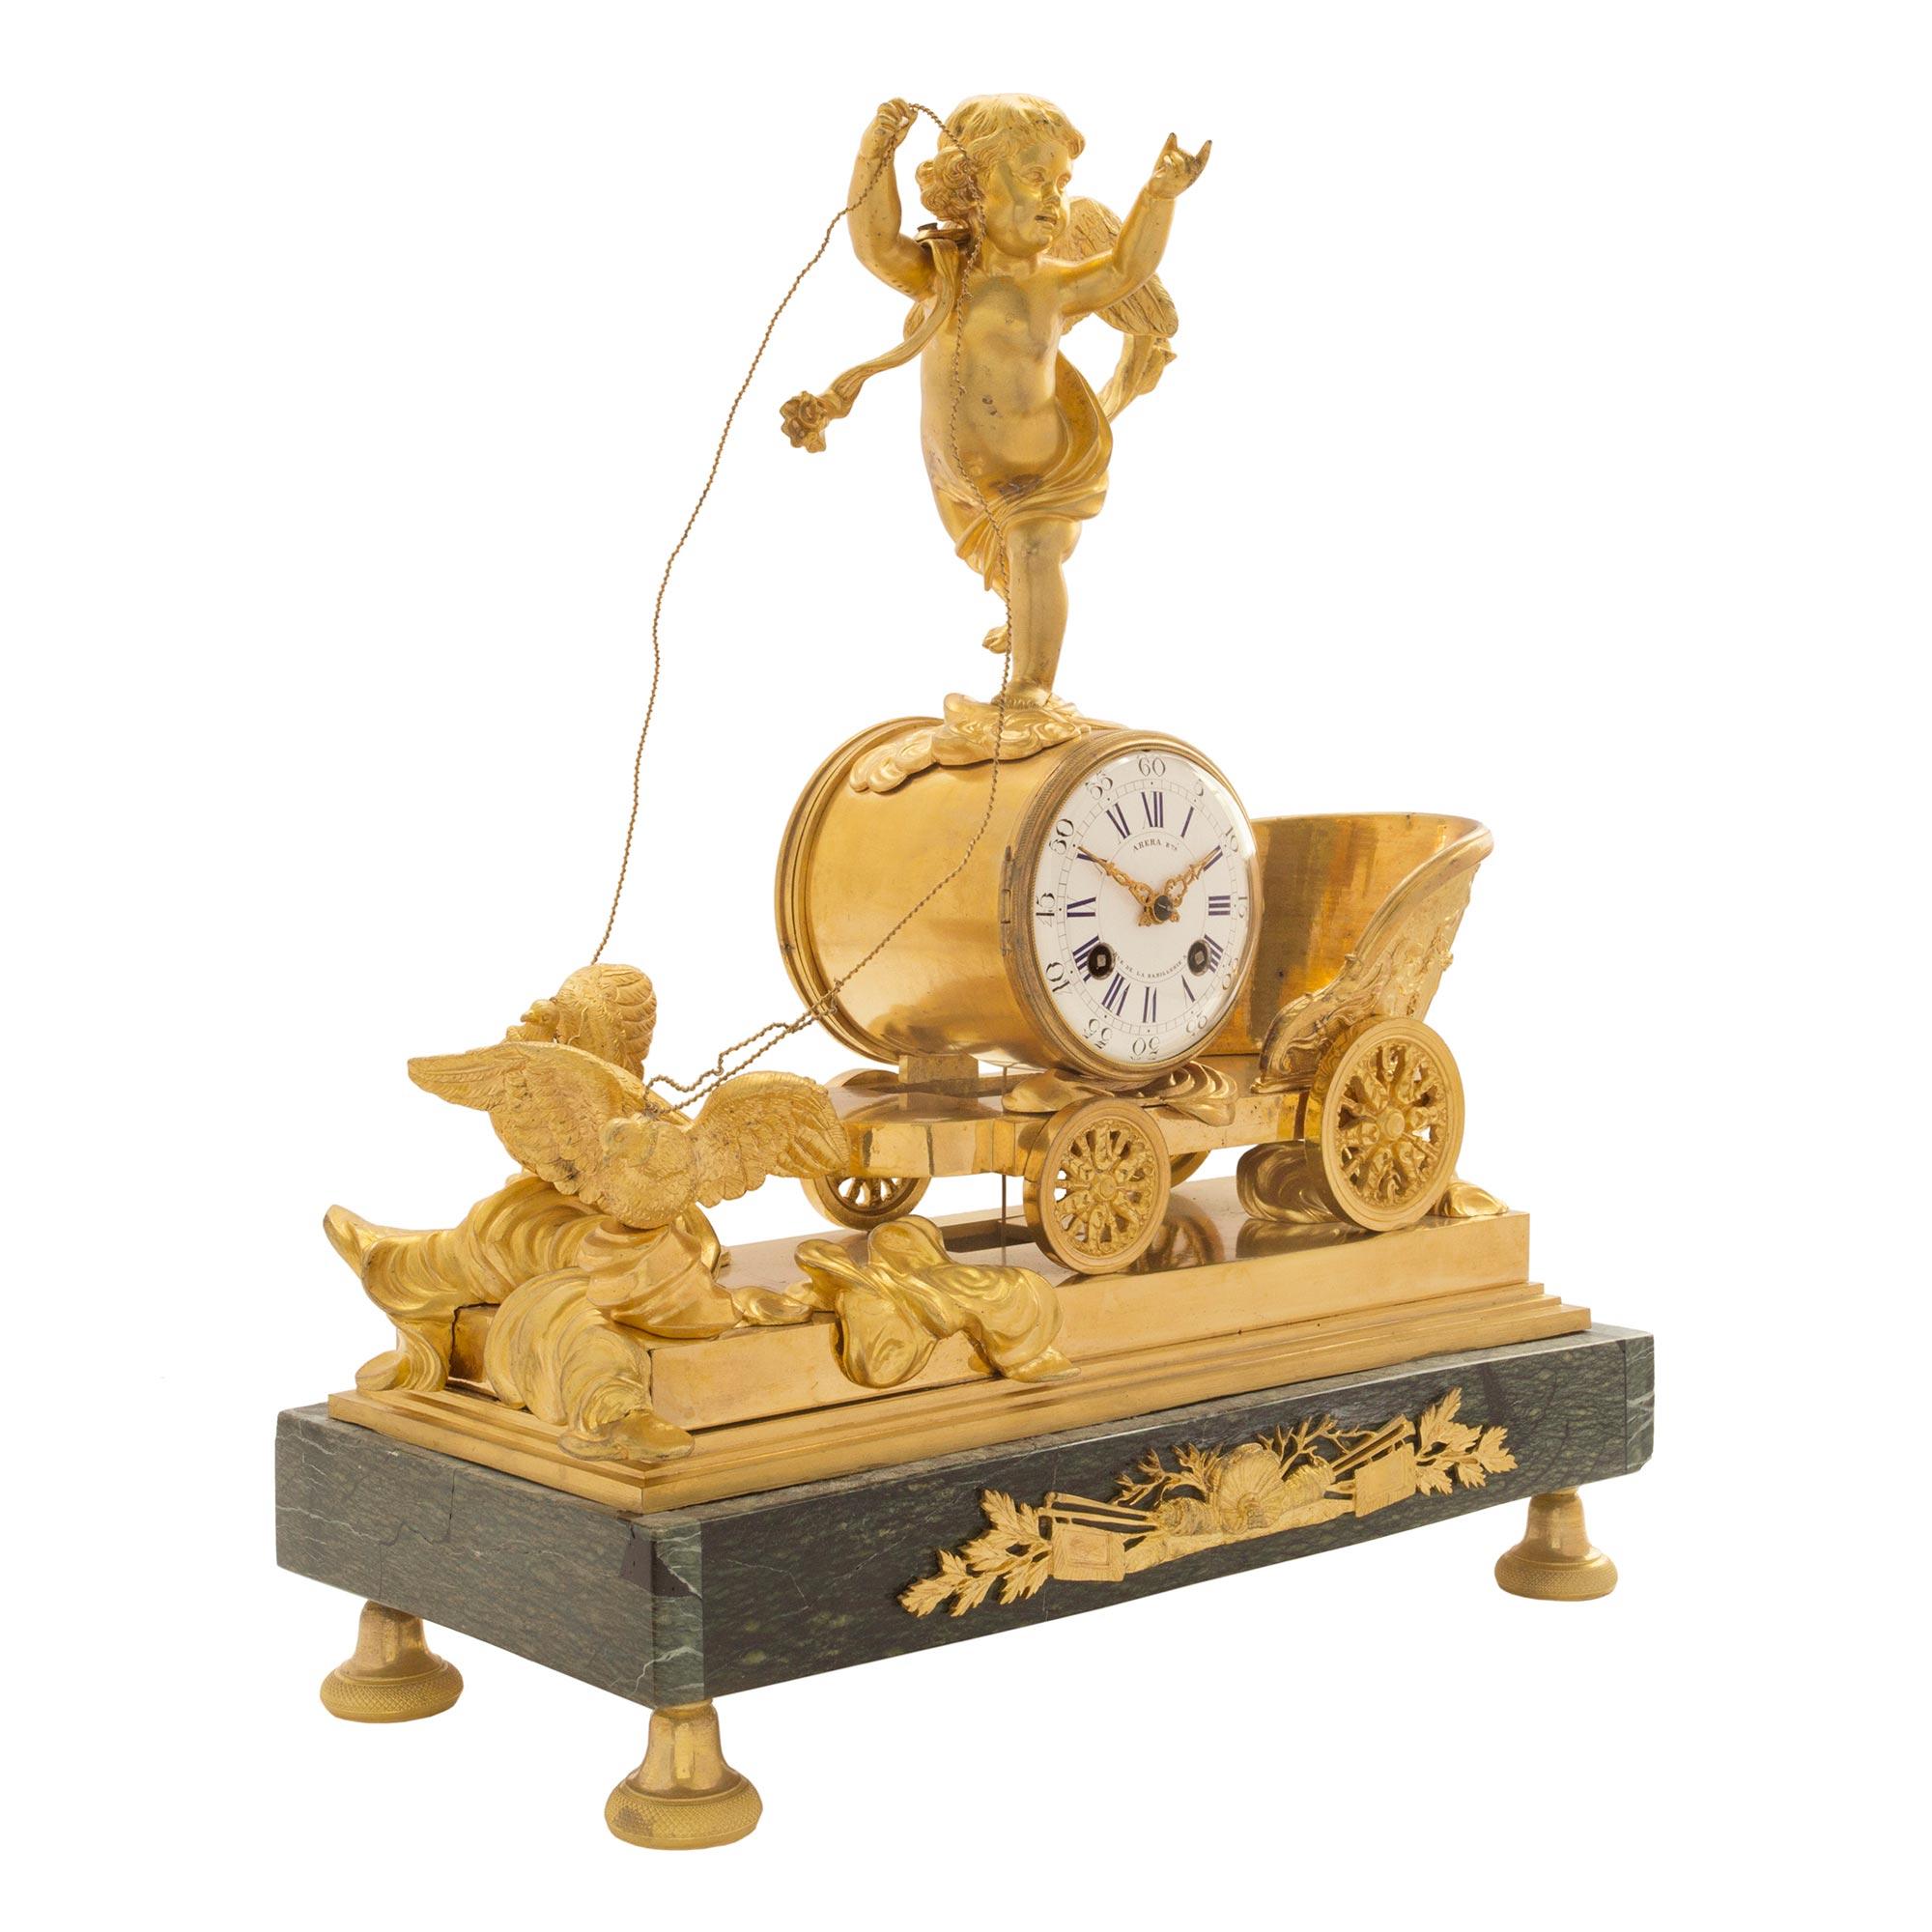 A spectacular mid 19th century French Neo-Classical Empire st. ormolu and marble clock. The clock is raised on a rectangular Vert Maurin marble base with ormolu supports. Centered at the front is an ormolu mount of shells and coral flanked by